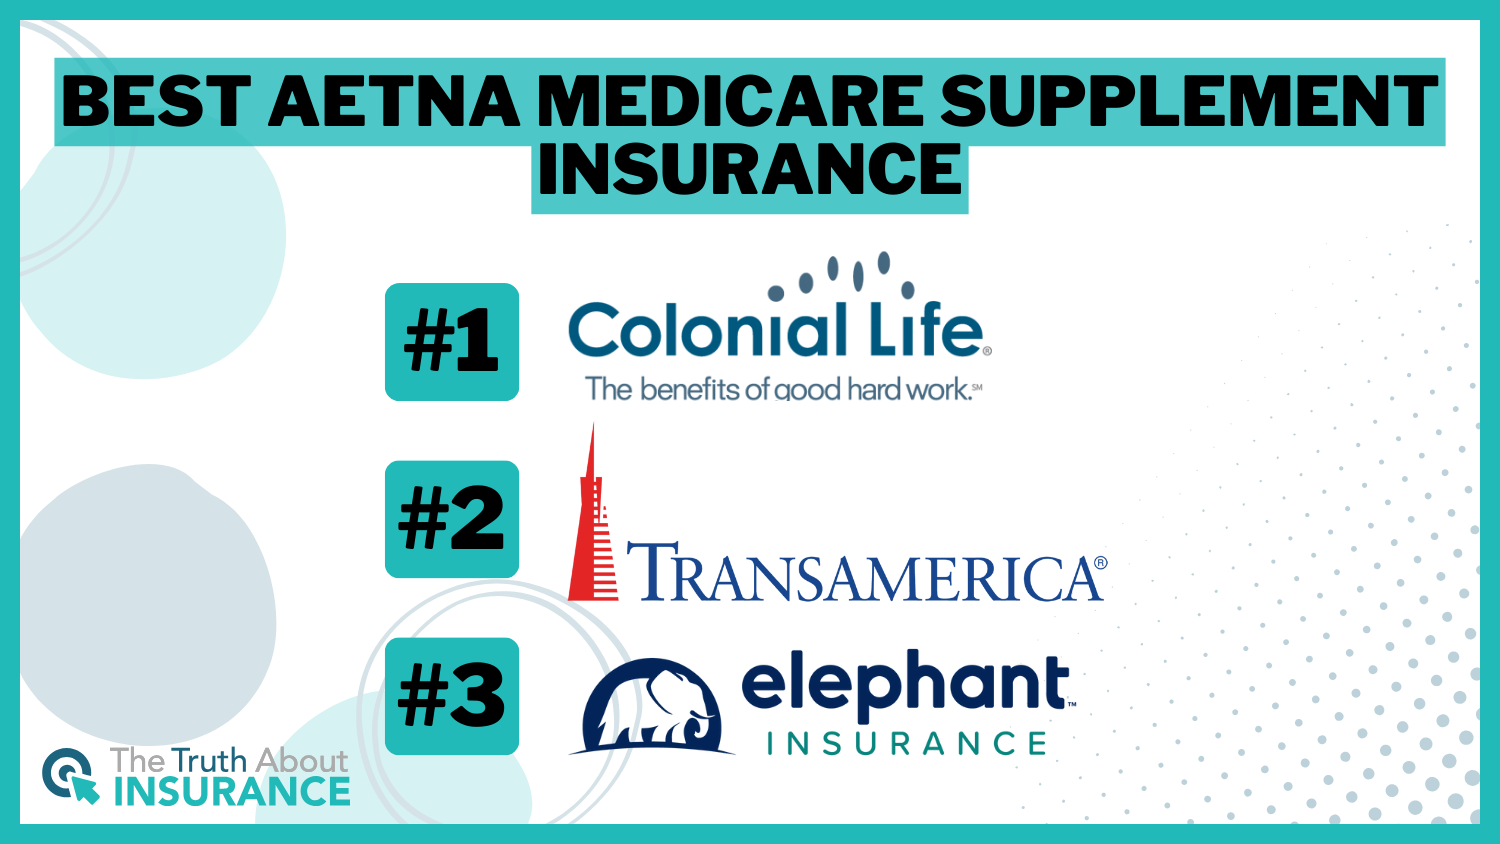 Best Aetna Medicare Supplement Insurance: Colonial Life, Transamerica, and Elephant